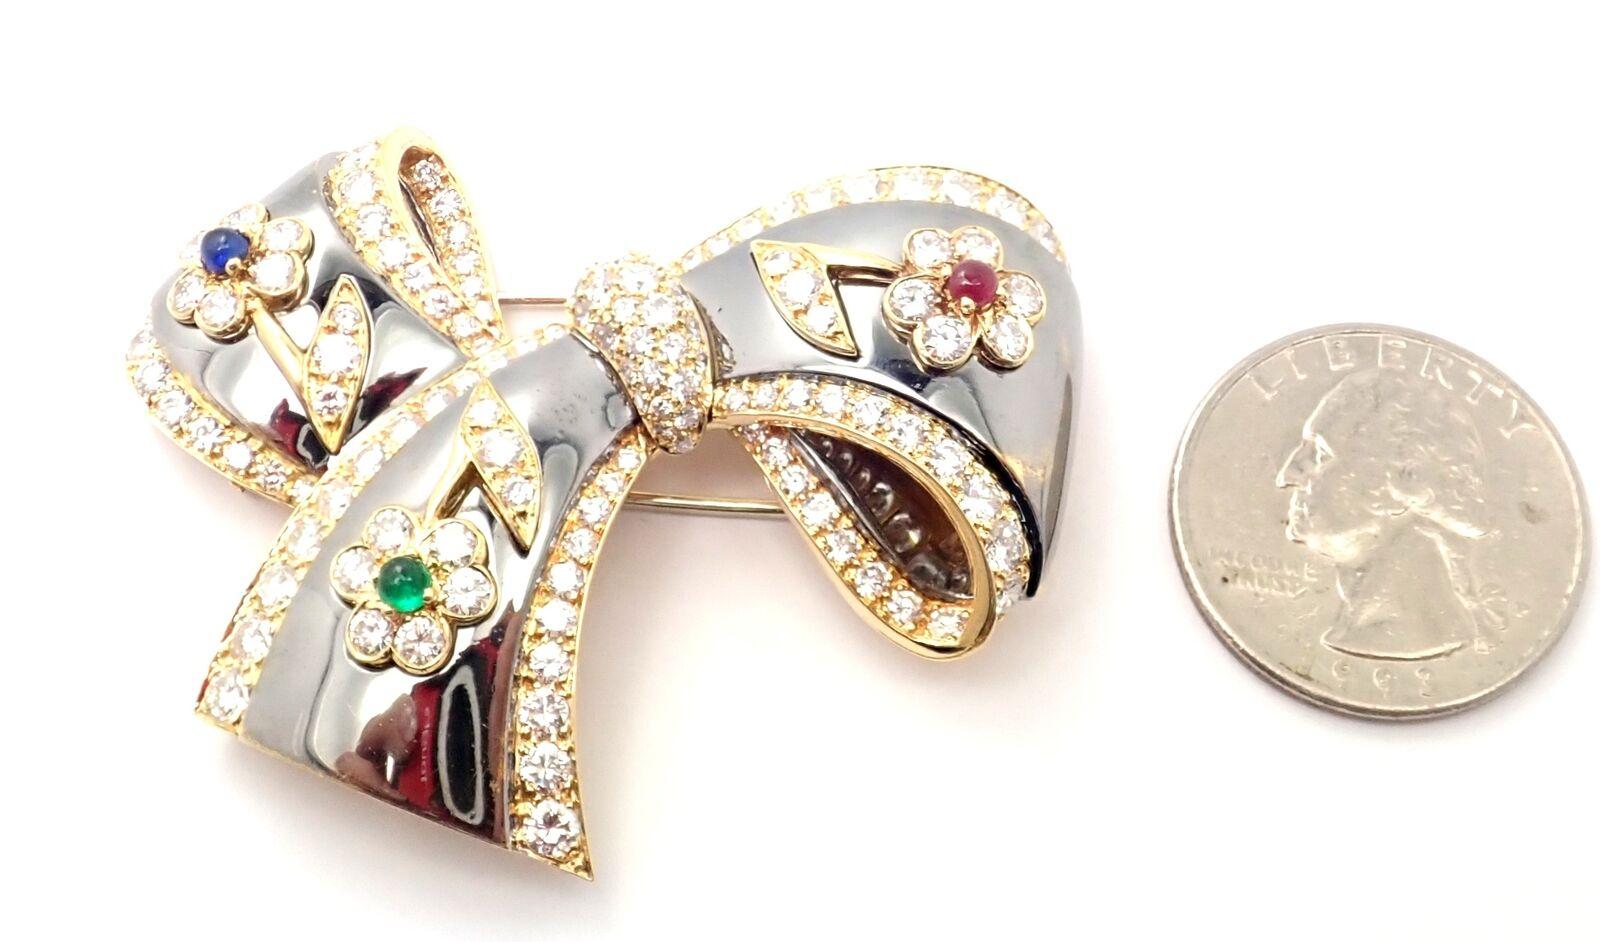 Van Cleef & Arpels Diamond Ruby Emerald Sapphire Flower Gold Pin Brooch In Excellent Condition For Sale In Holland, PA